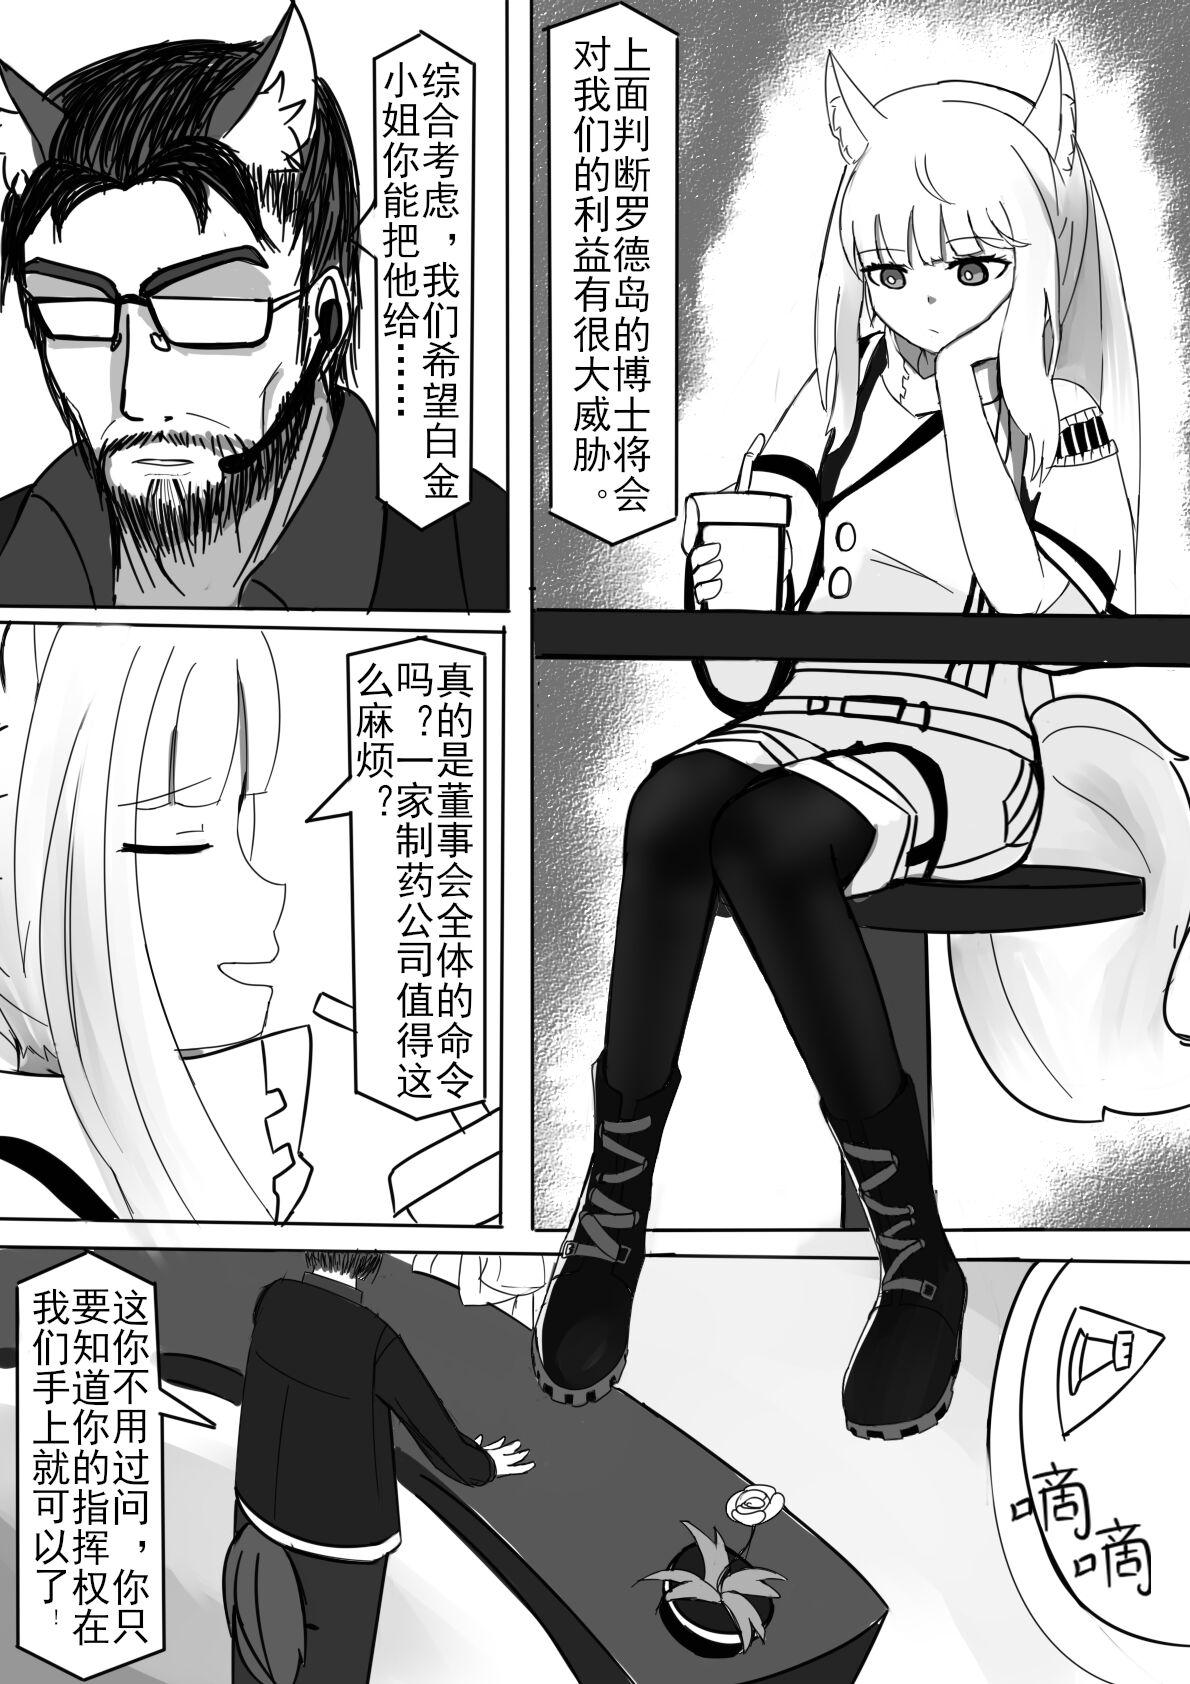 Brazil 白马？ - Arknights Transsexual - Page 2